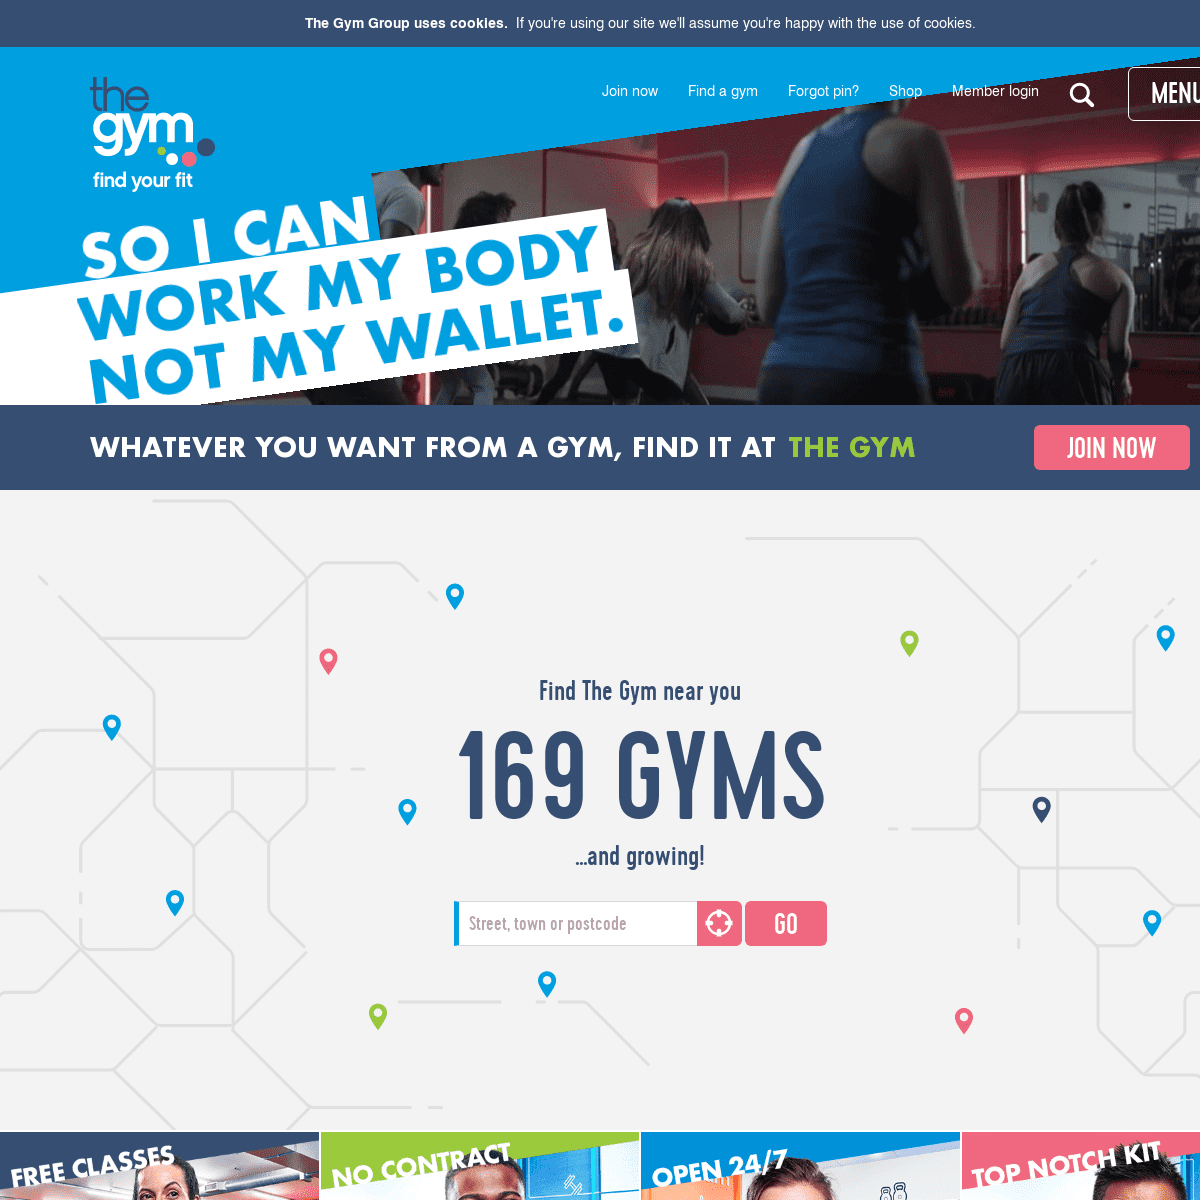 The Gym Group | Low Cost Gyms | Open 24/7 | No Contract